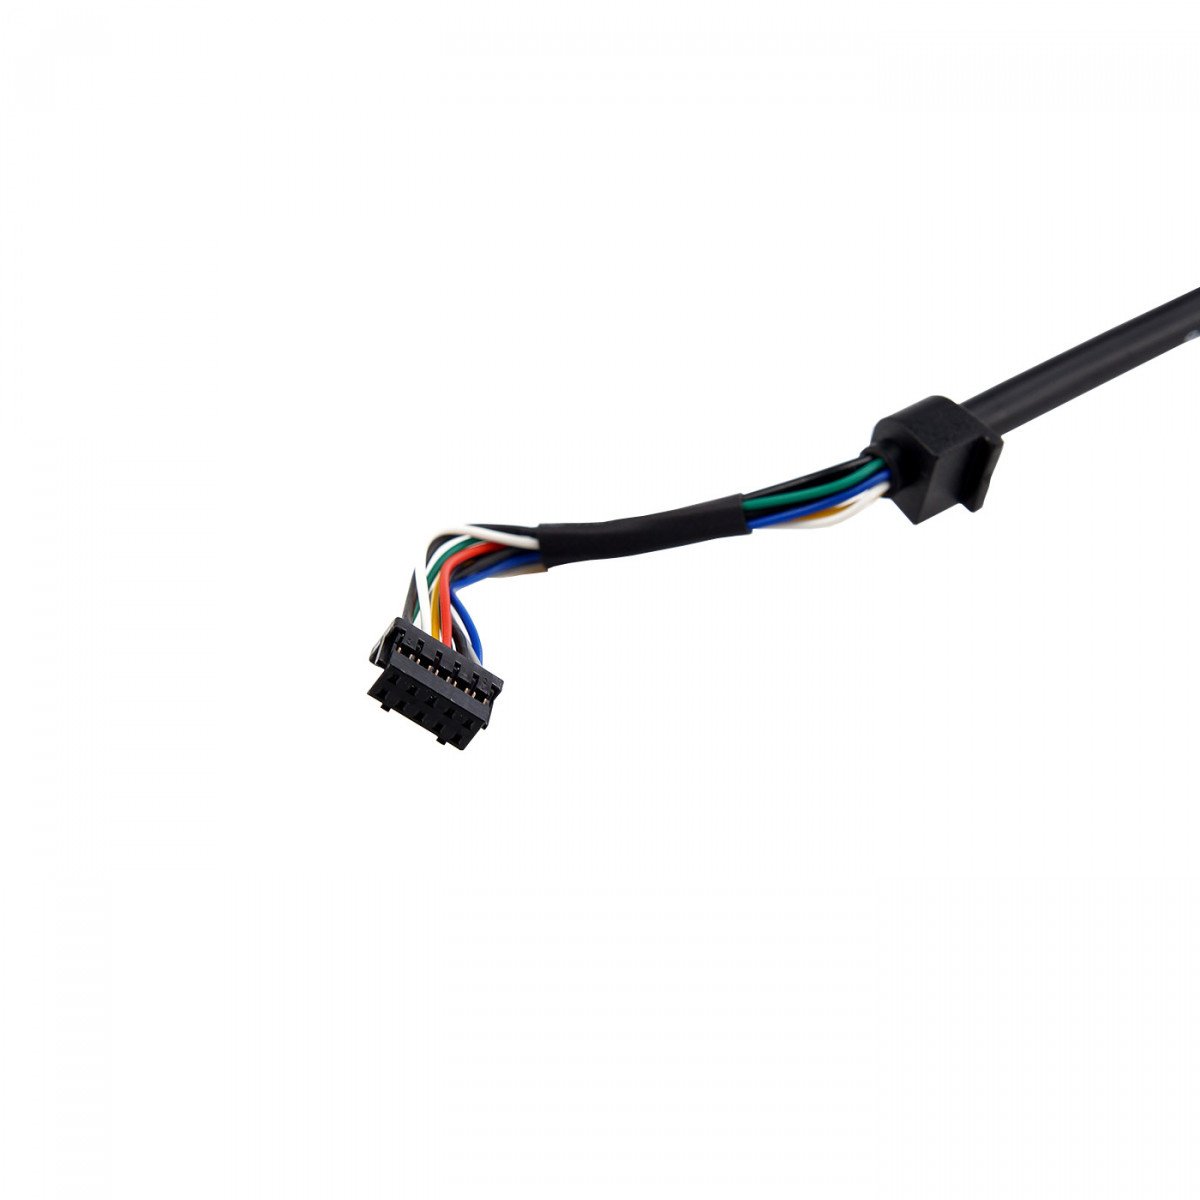 SEPURA audio interface cable for connecting external audio accessories to the control panel or AIU, for SRG/SCG 700-00212